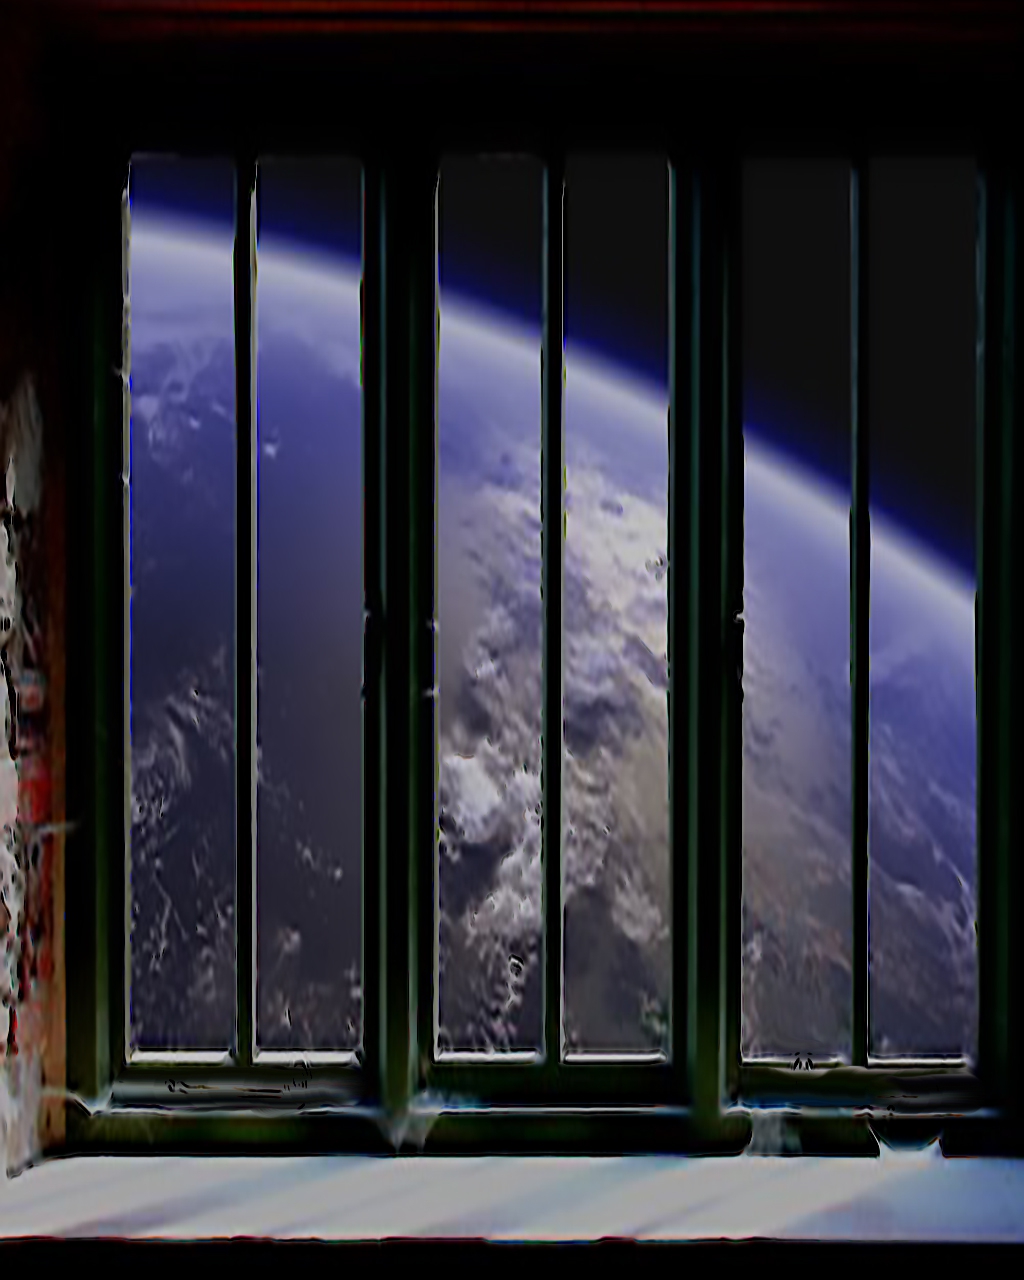 A view of Earth from orbit through stylized windows.